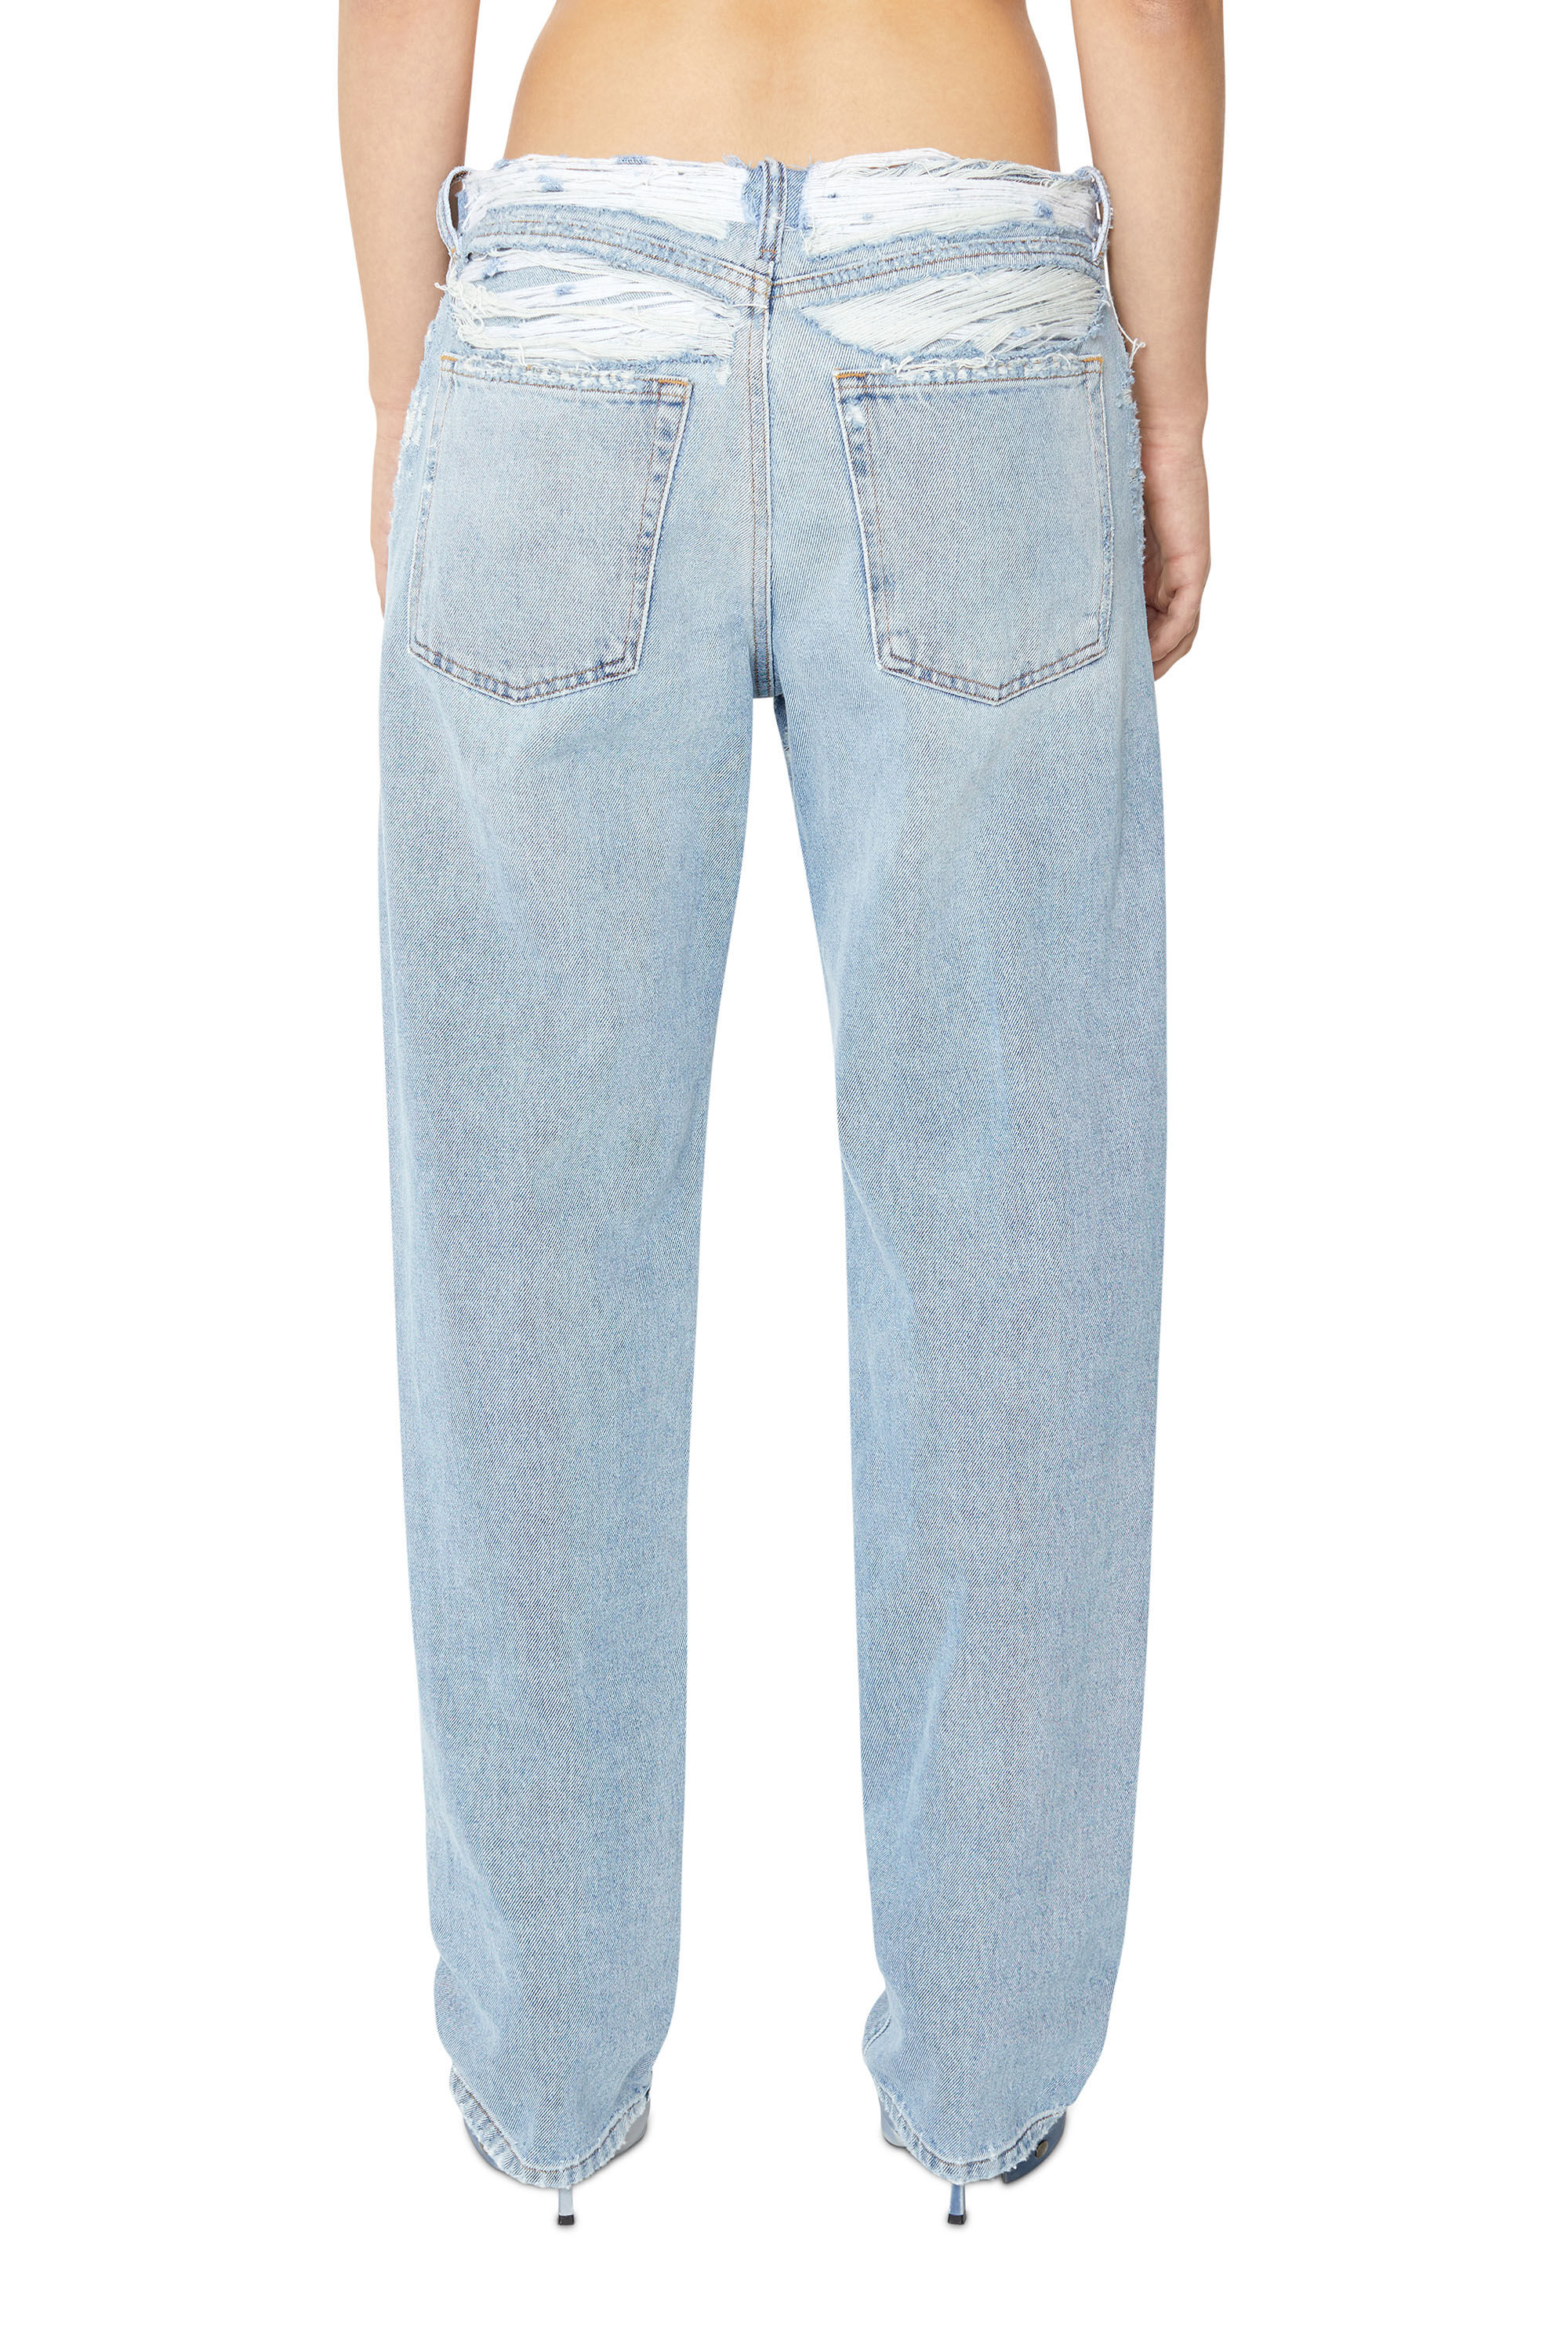 Blue Womens Clothing Jeans Flare and bell bottom jeans Boohoo Denim High Waisted Flared Jeans in Washed Indigo 